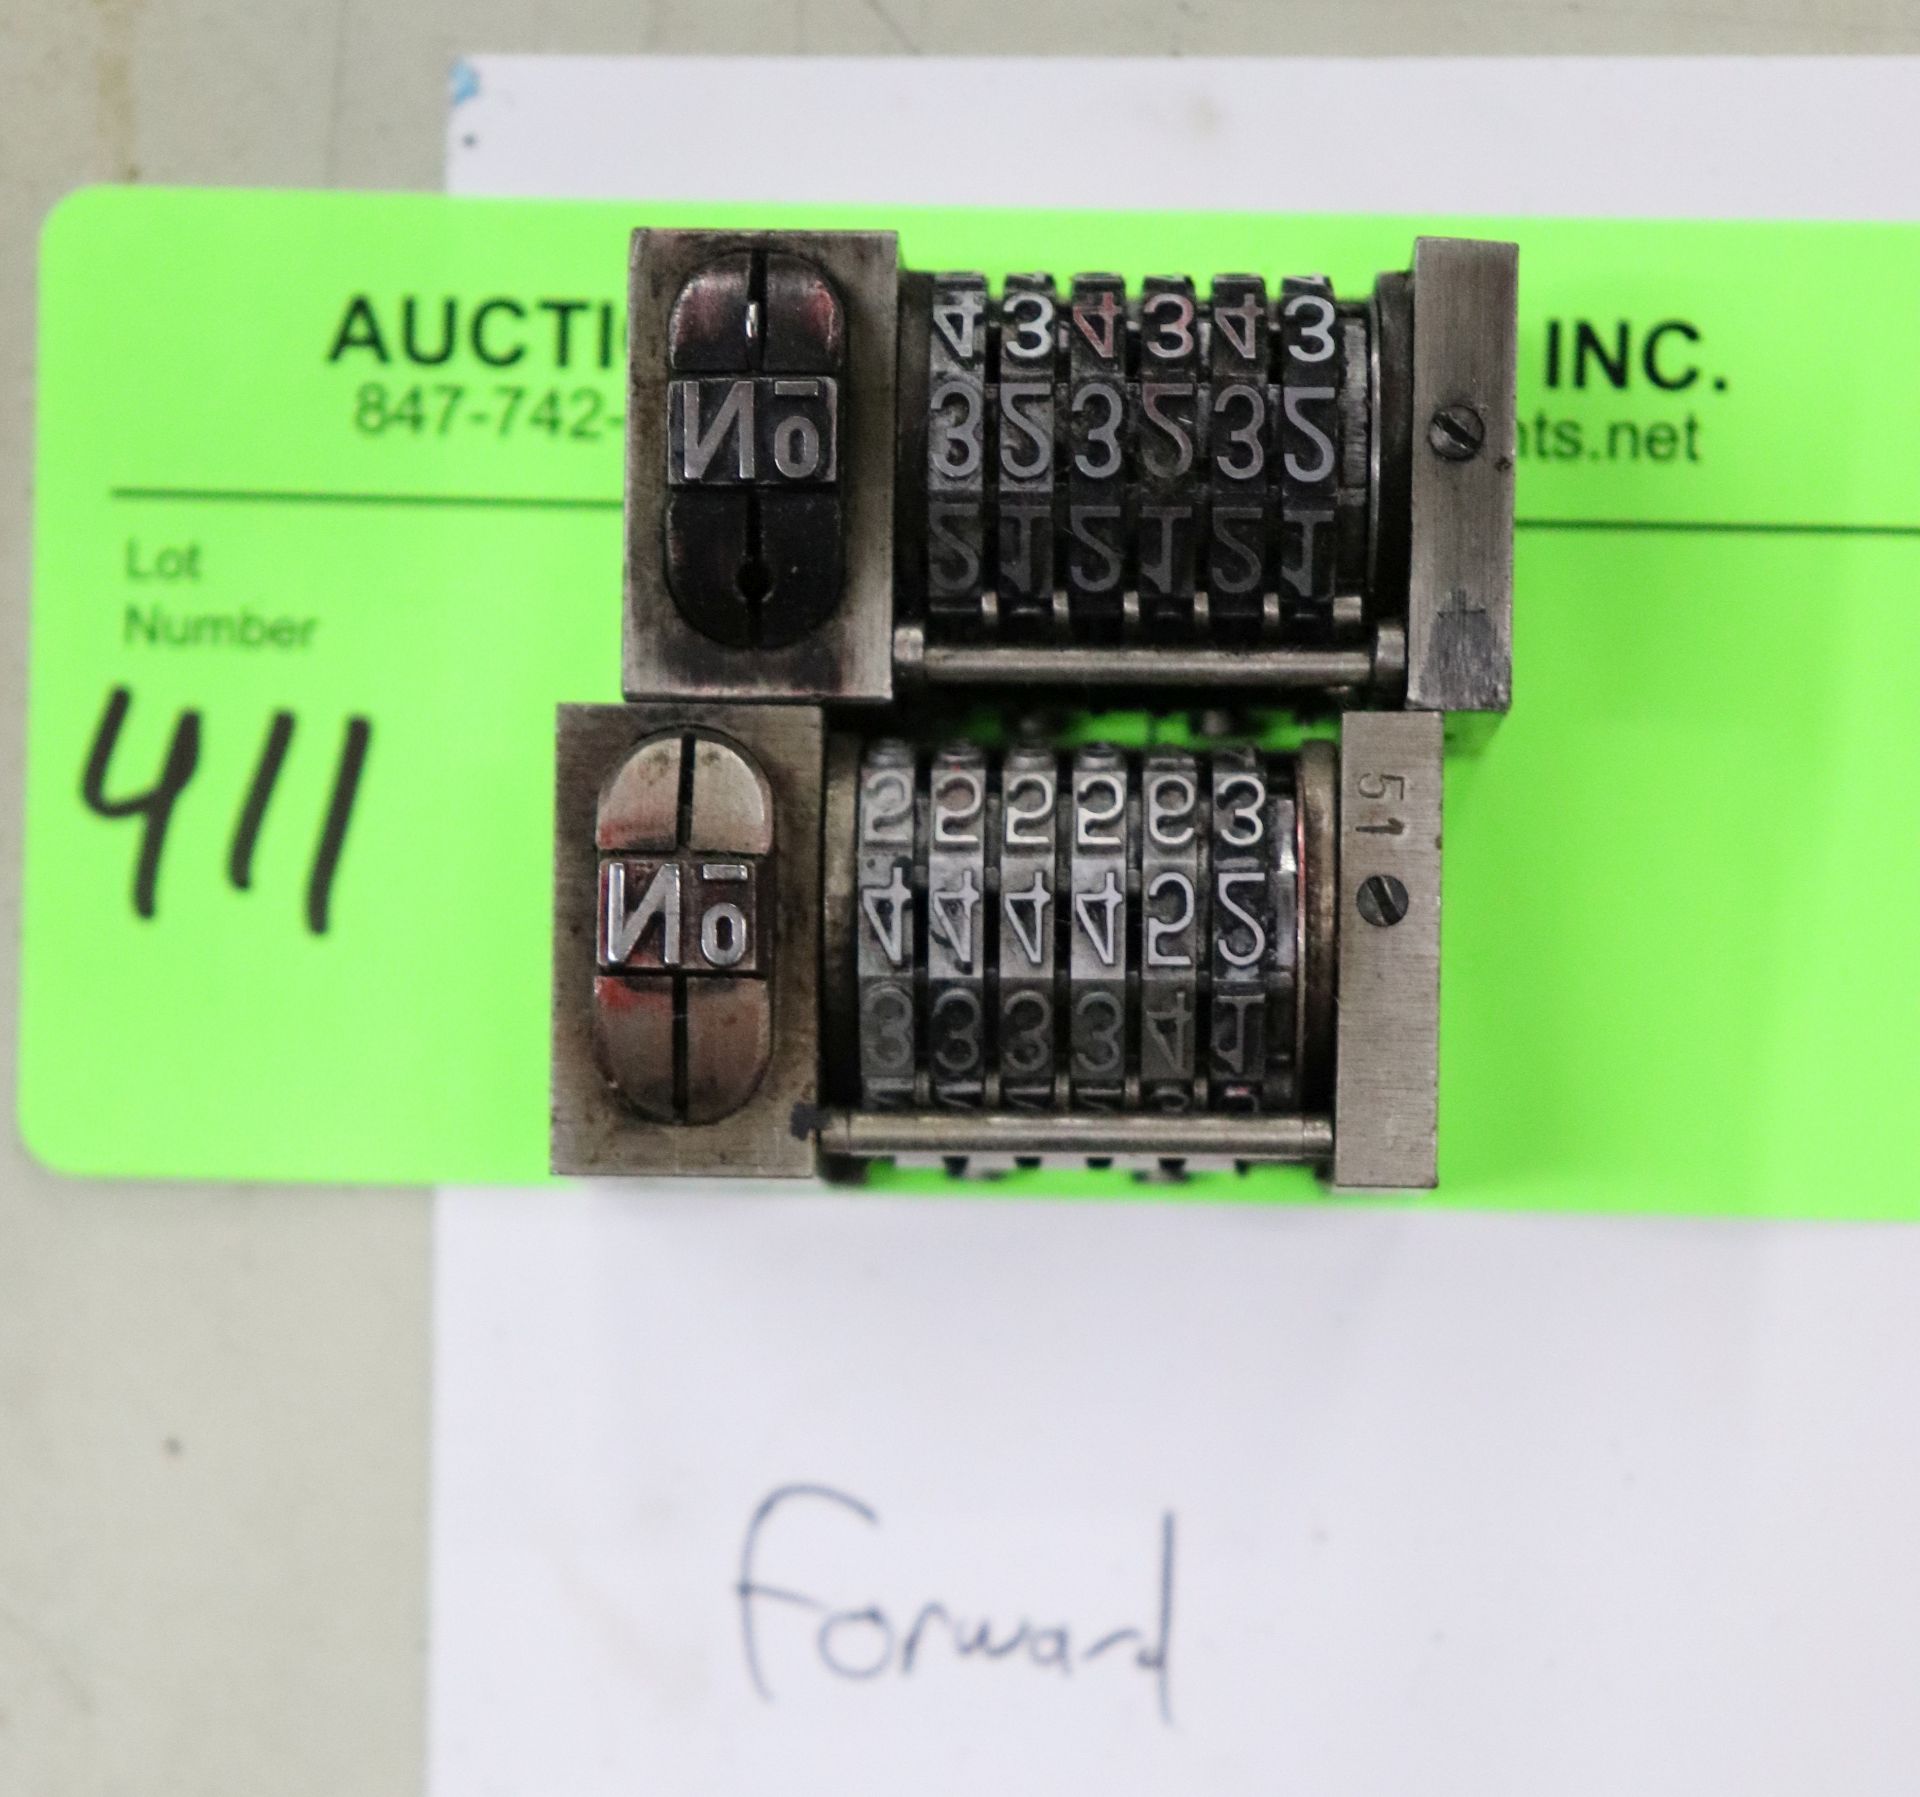 Set of two forward numbering machines